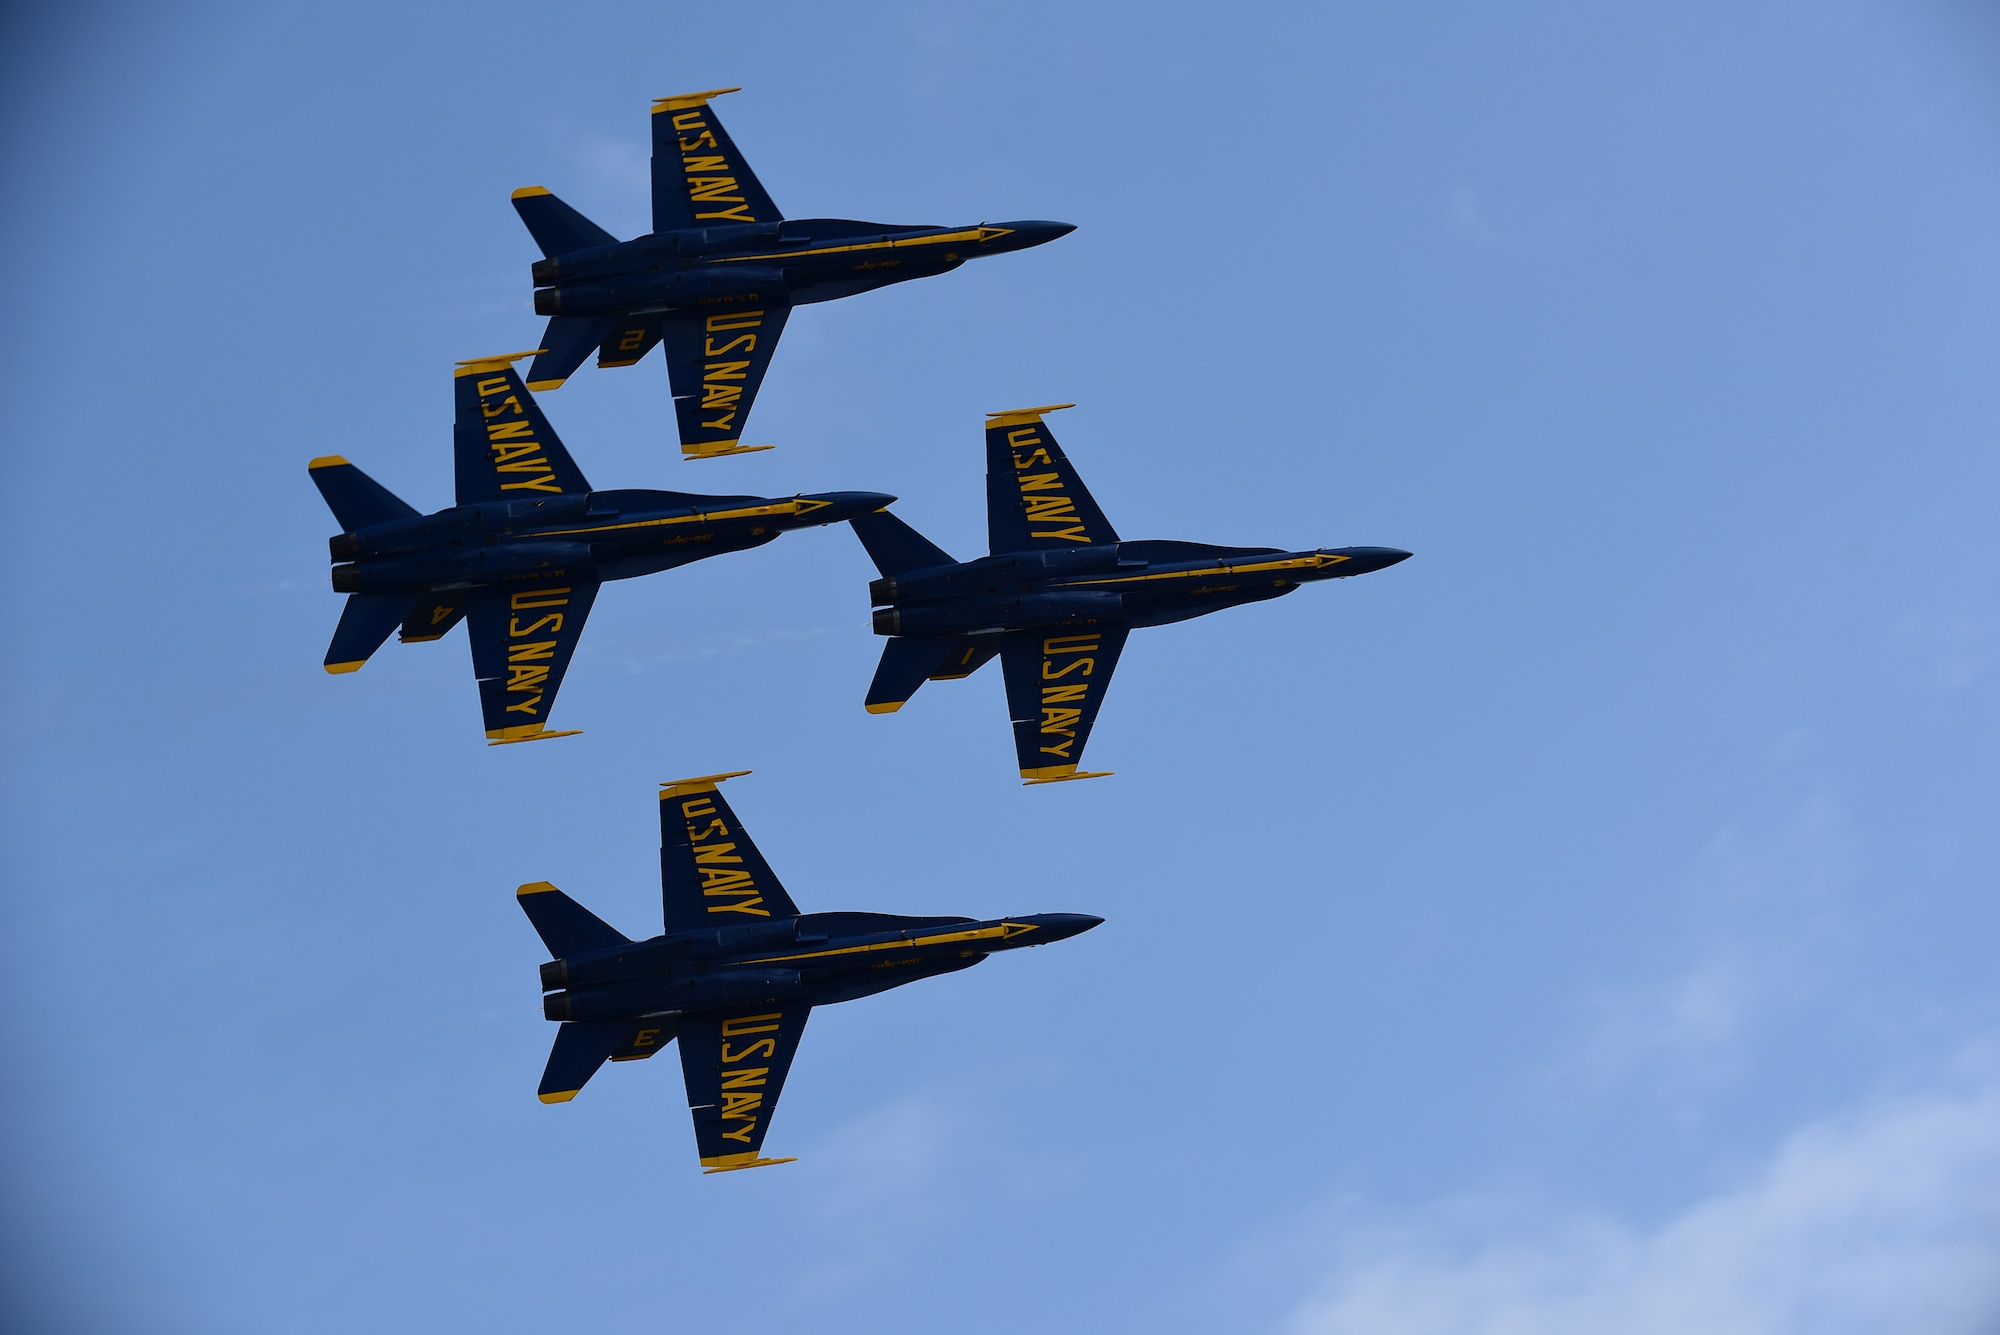 The U.S. Navy Blue Angels fly in formation during the Wings Over Wayne Air Show, May 21, 2017, at Seymour Johnson Air Force Base, North Carolina. Seymour Johnson AFB hosted the free, two-day air show as a way to thank the public and local community for their ongoing support of the base’s missions. (U.S. Air Force photo by Airman 1st Class Kenneth Boyton)